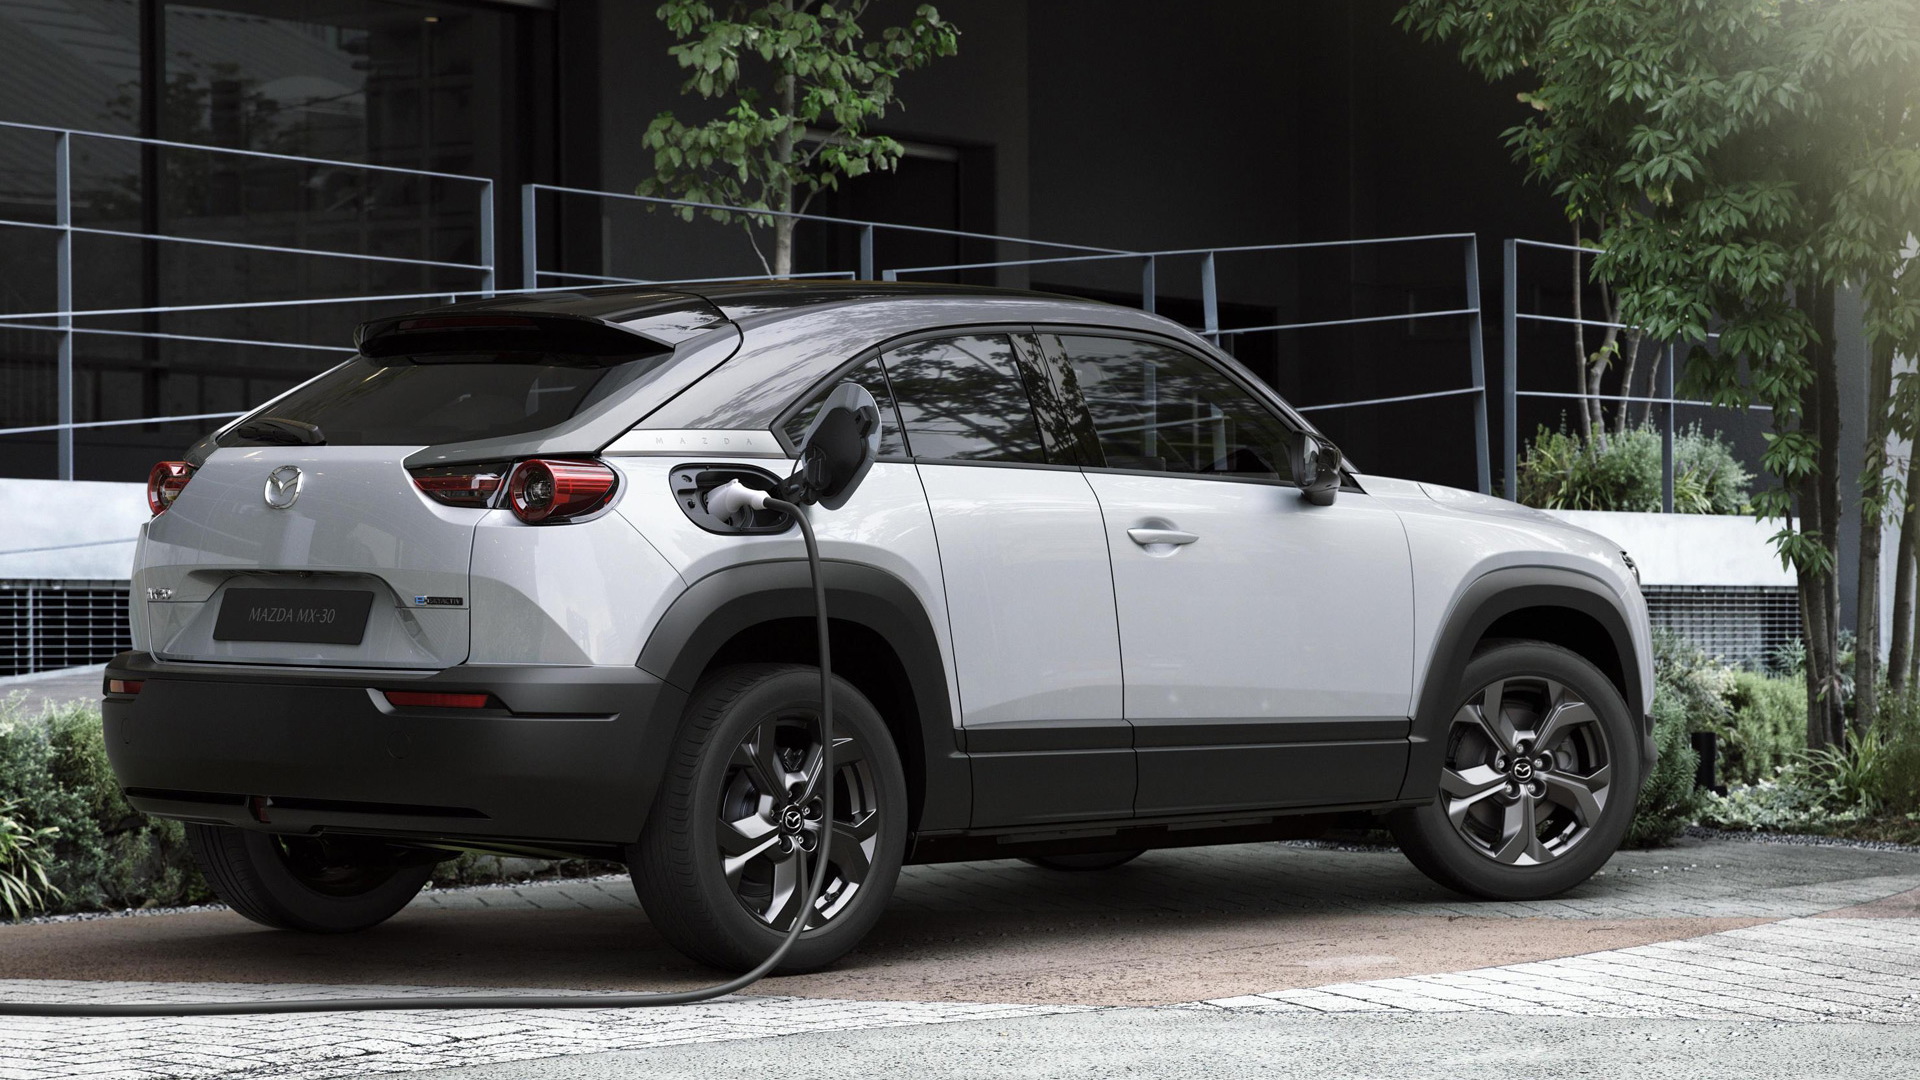 Mazda MX30 electric SUV debuts with RX8style doors